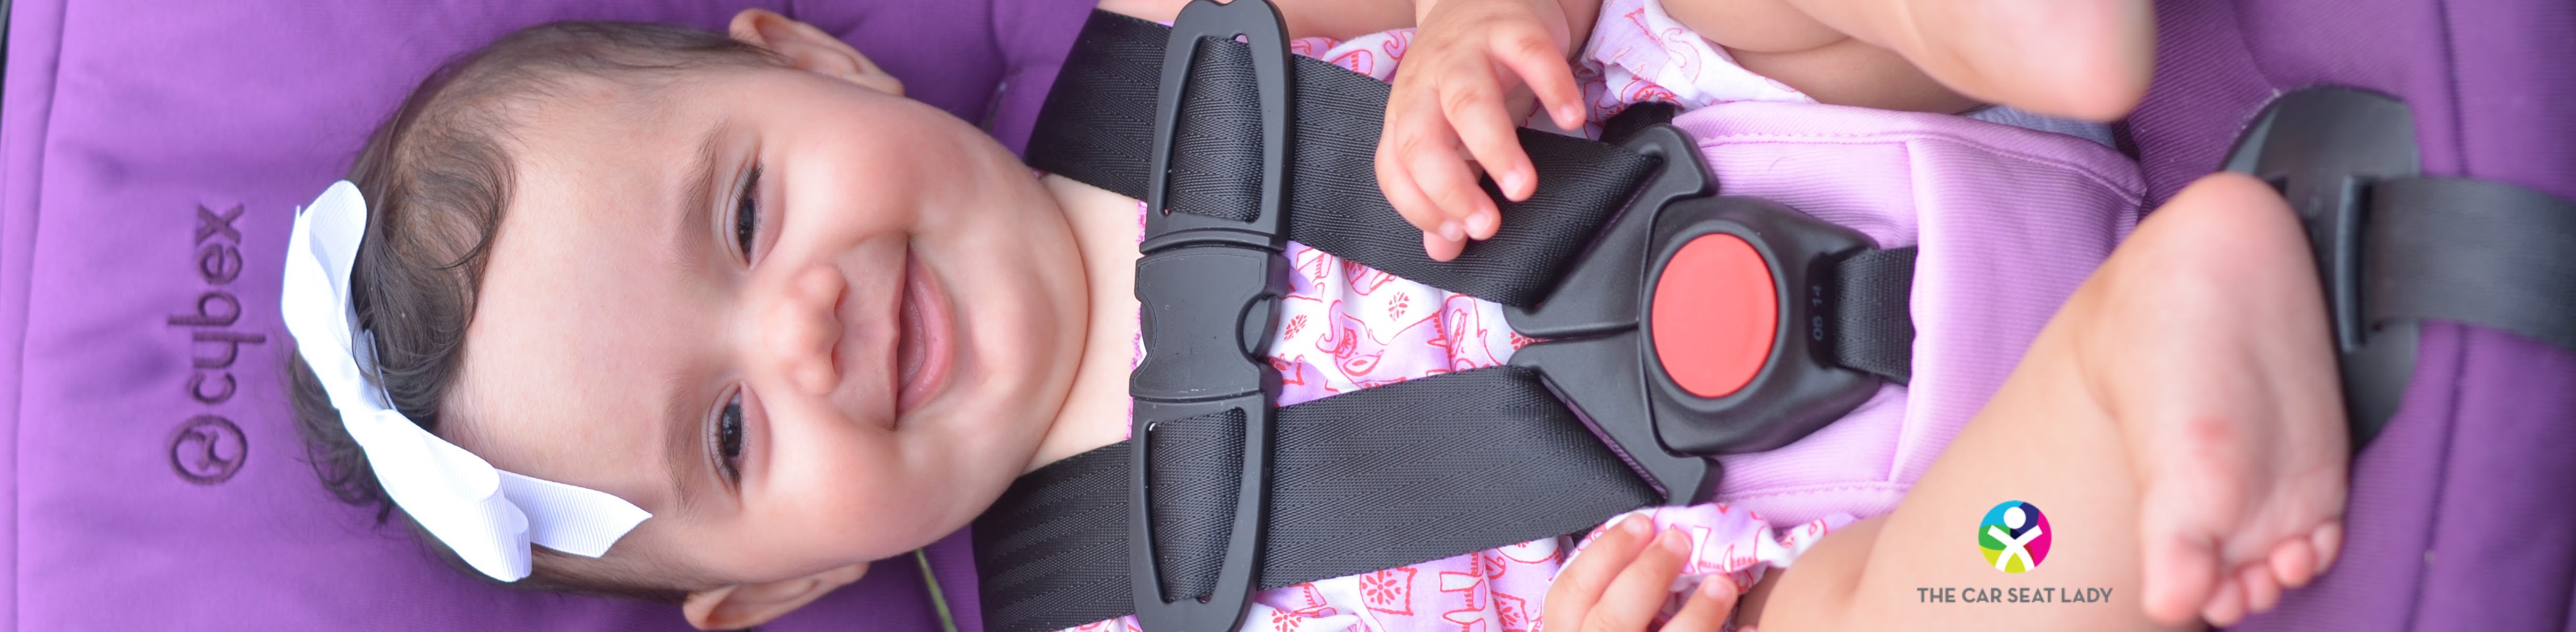 The Car Seat LadyInfant Car Seat Buying Guide - Cybex - The Car Seat Lady